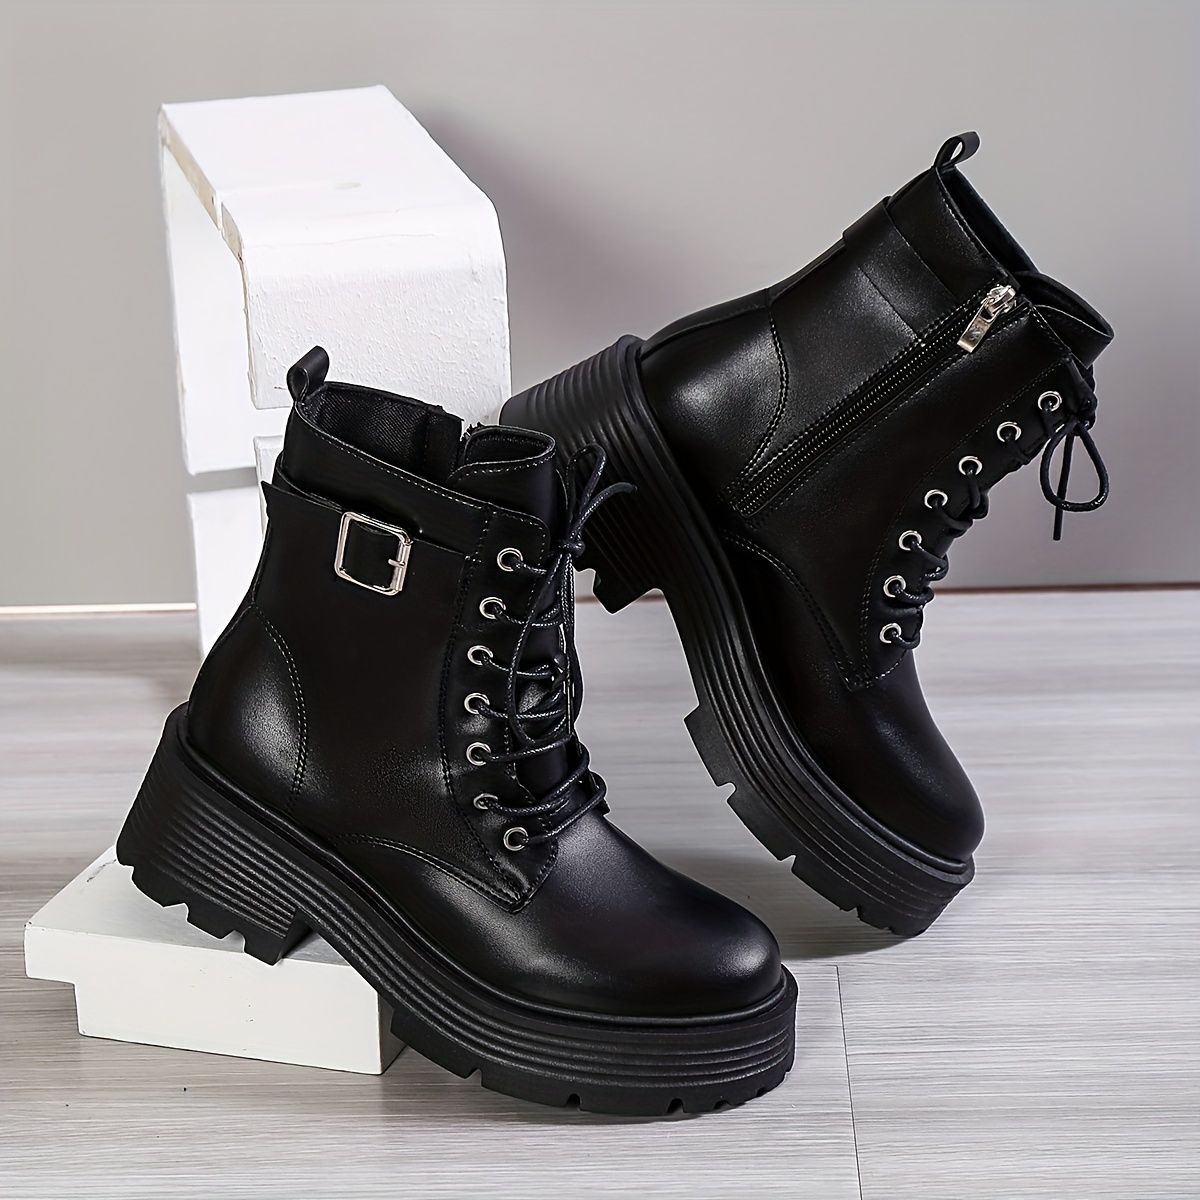 Women's Black Leather Combat Lace Up Ankle Boots